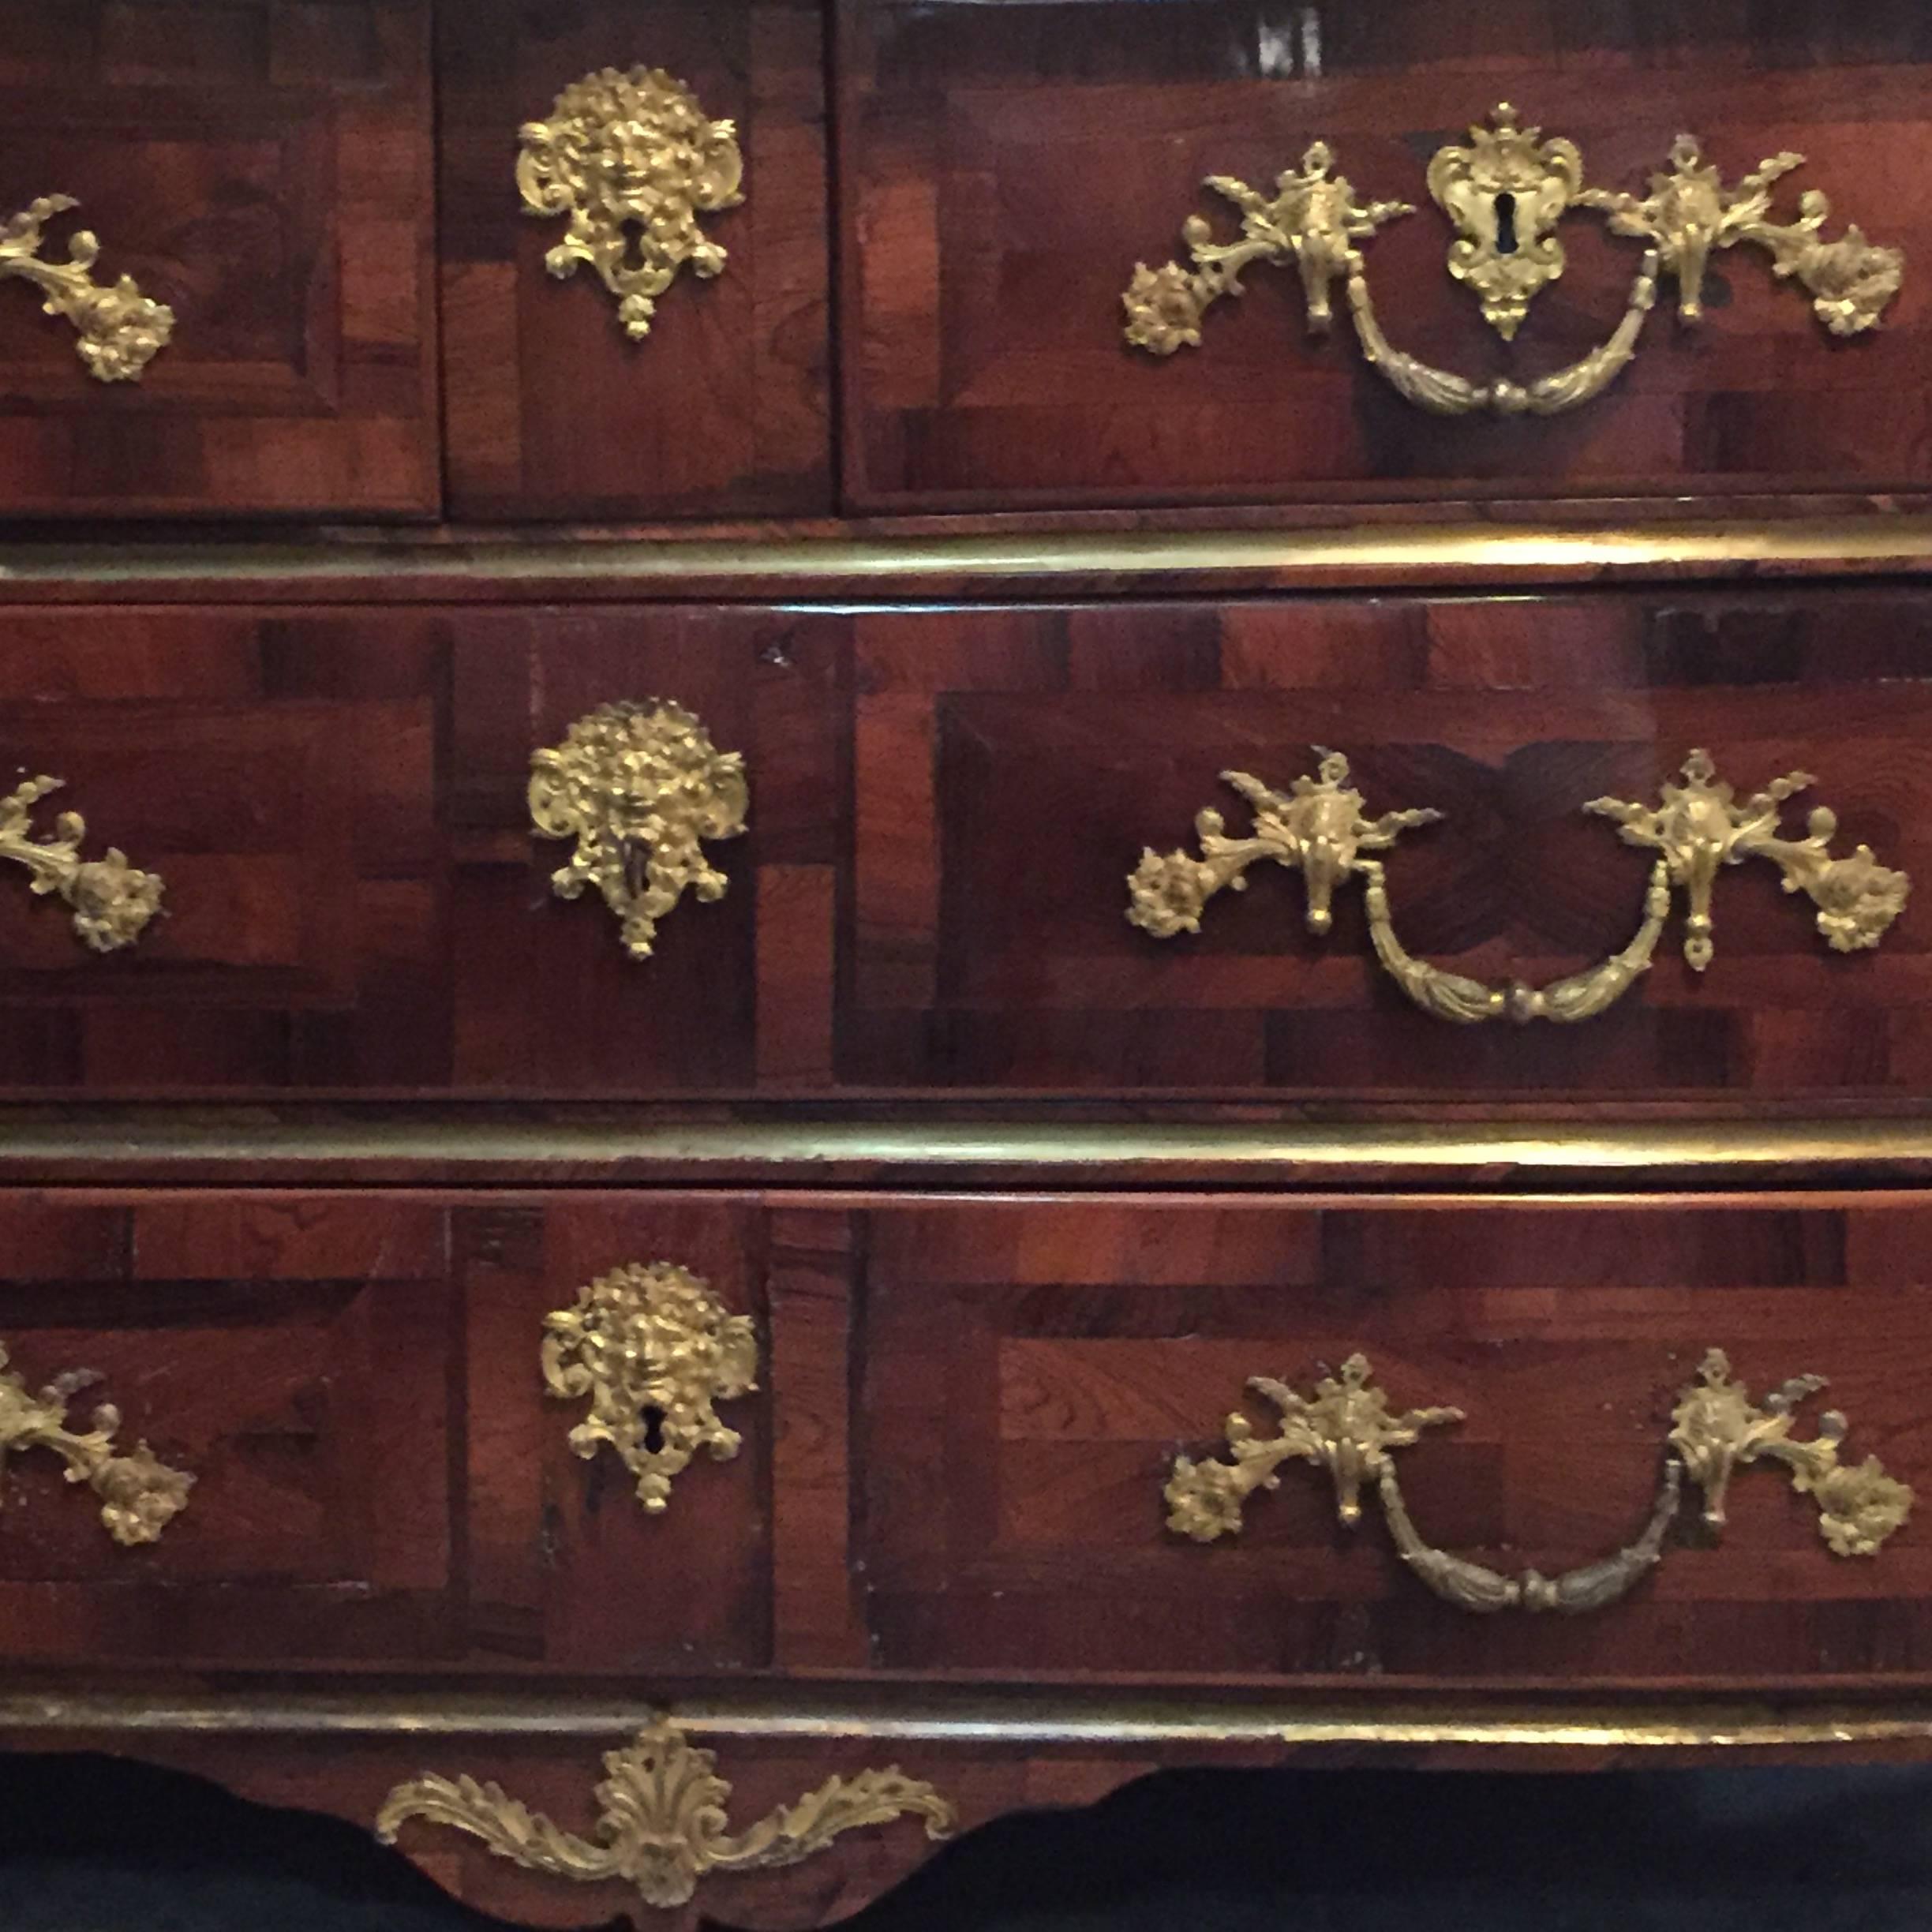 Important Regence commode created in the 18th century
Four drawers with locking device
Carved gilt bronzes and marble top
Bronzes on front legs and lower middle decoration
Escutcheon plate and drawer pulls carved
Gilt decoration on